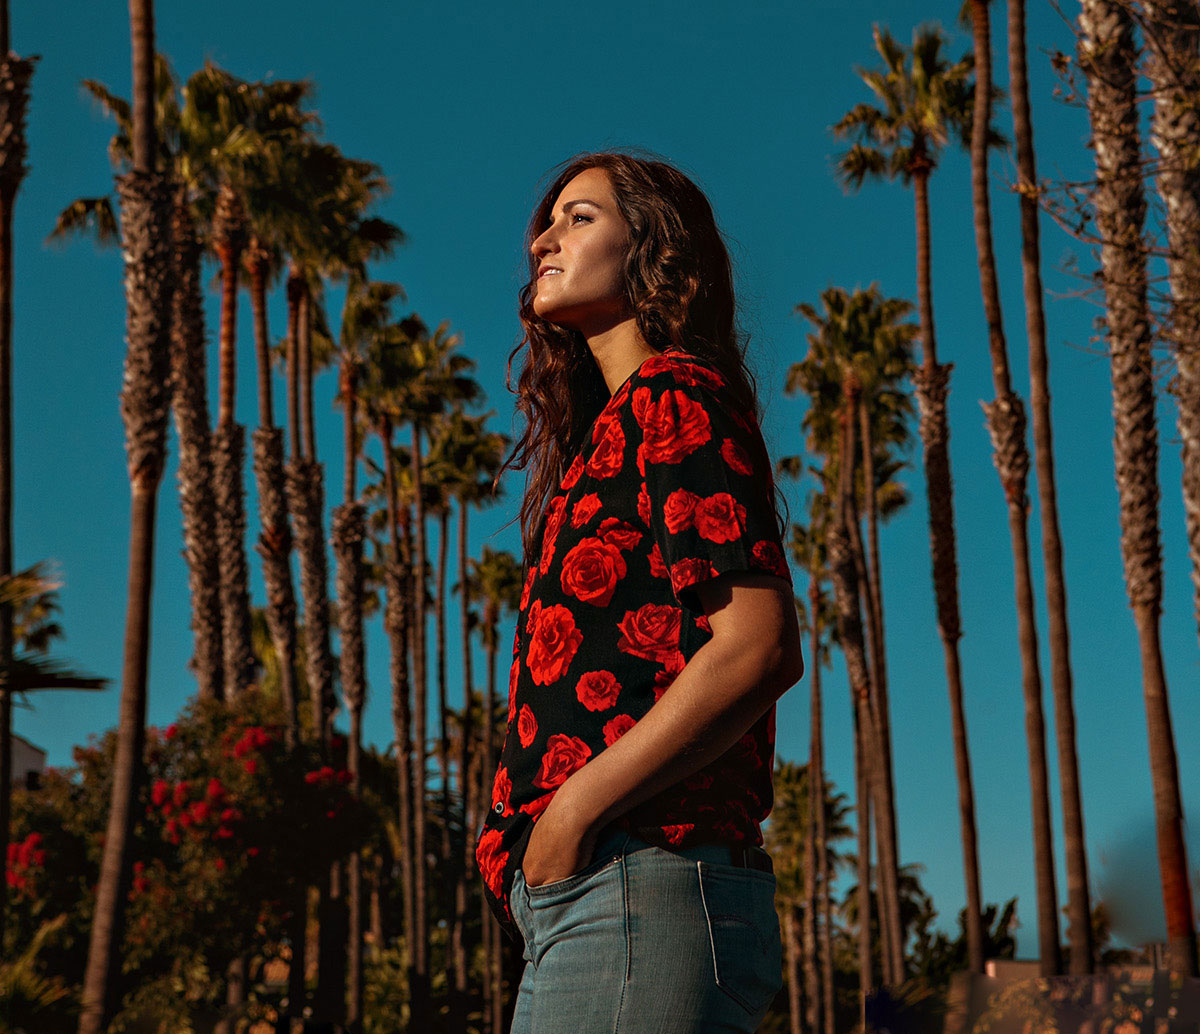 Angie K standing in front of palm trees and a blue sky.